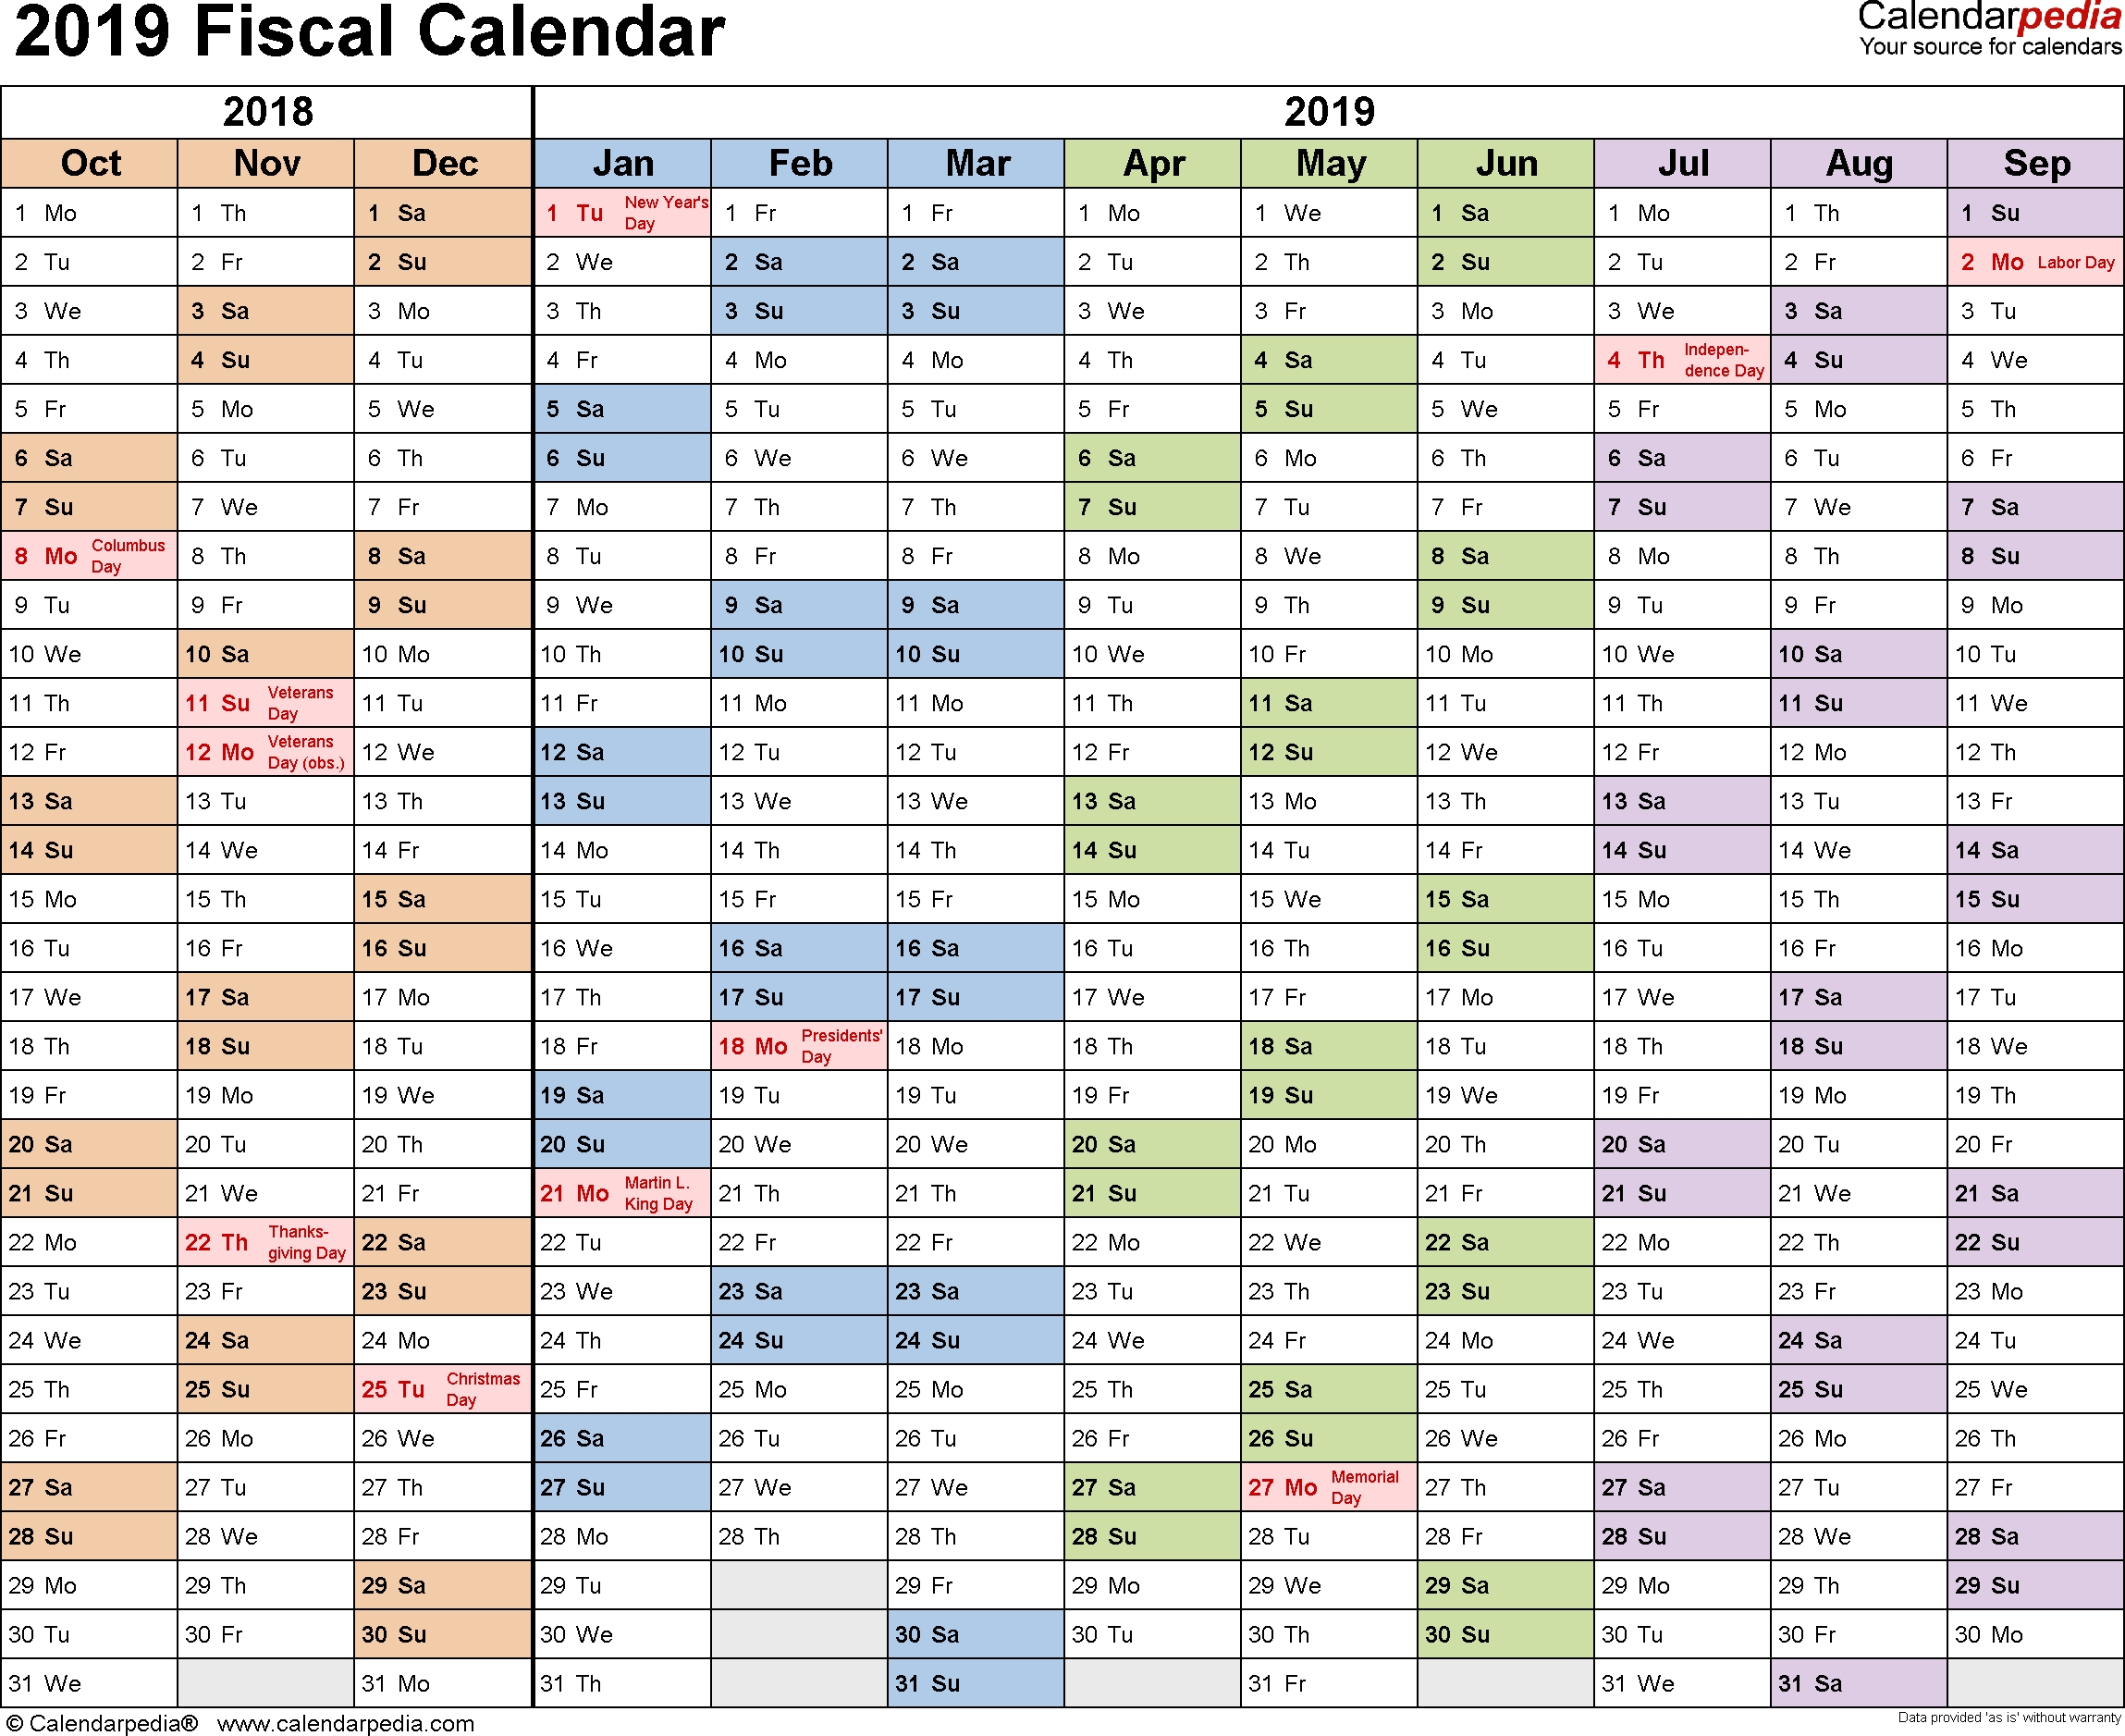 Fiscal Calendars 2019 - Free Printable Word Templates within Fiscal Calendar 2019/2020 Free Printable